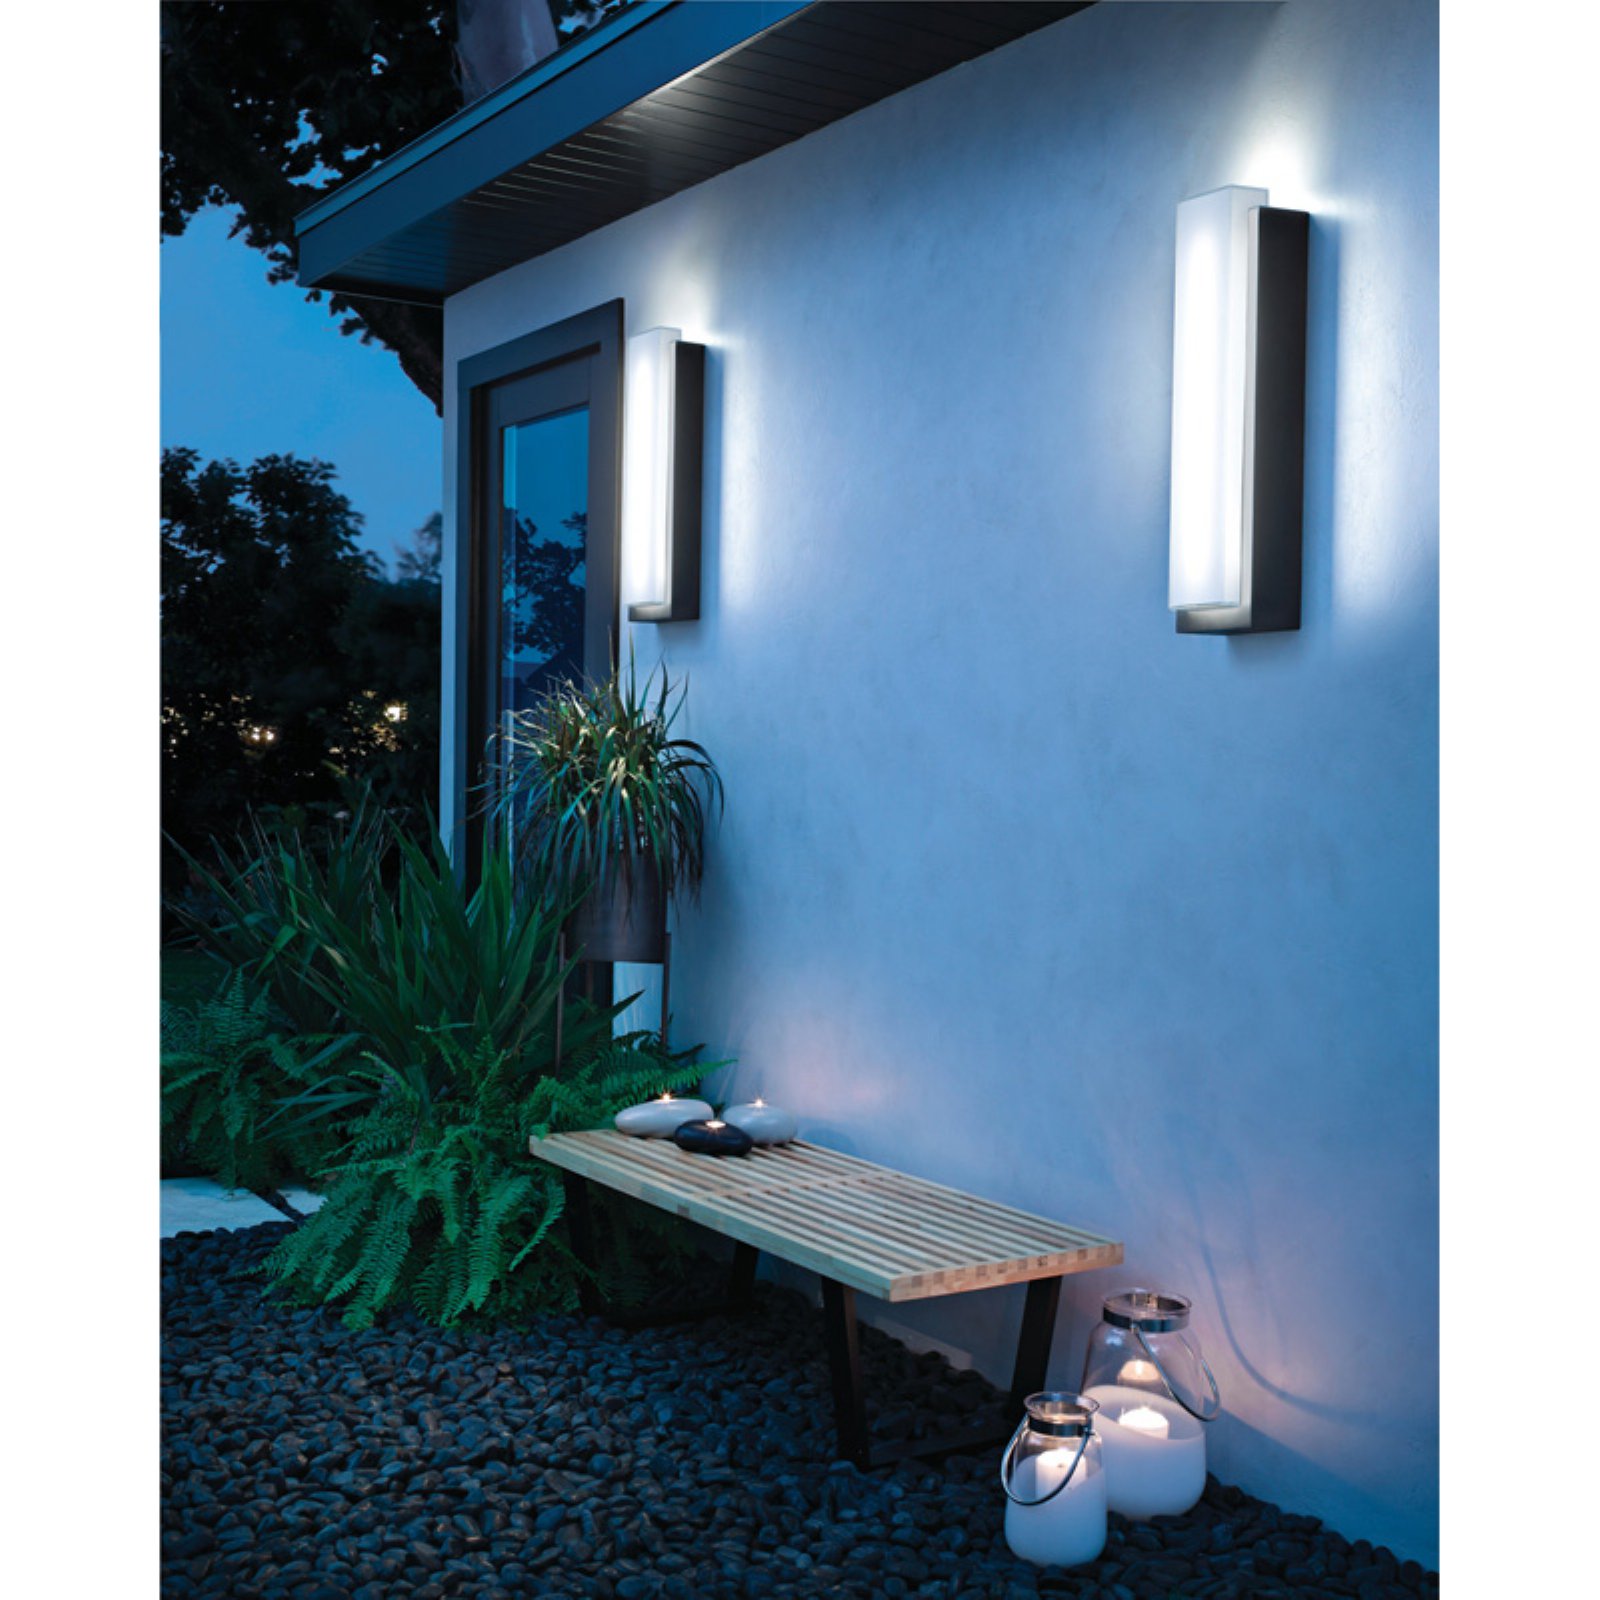 Kichler 49557Led Dahlia Light 19" Tall Led Outdoor Wall Sconce - image 4 of 4